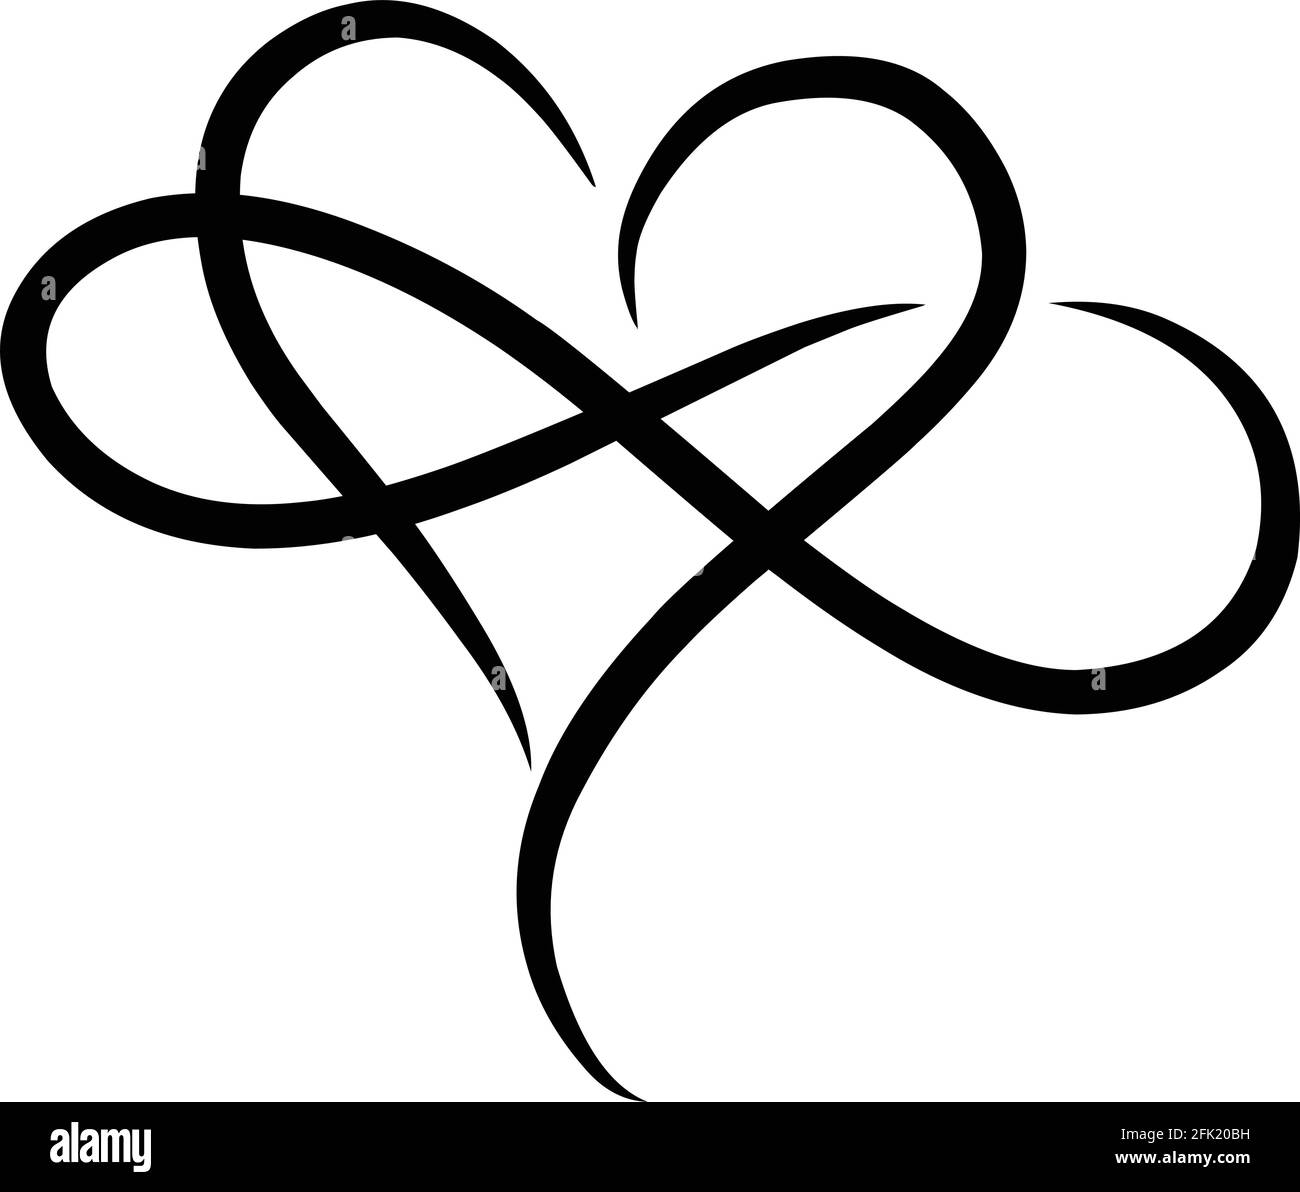 Infinity love design with heart illustration Stock Vector